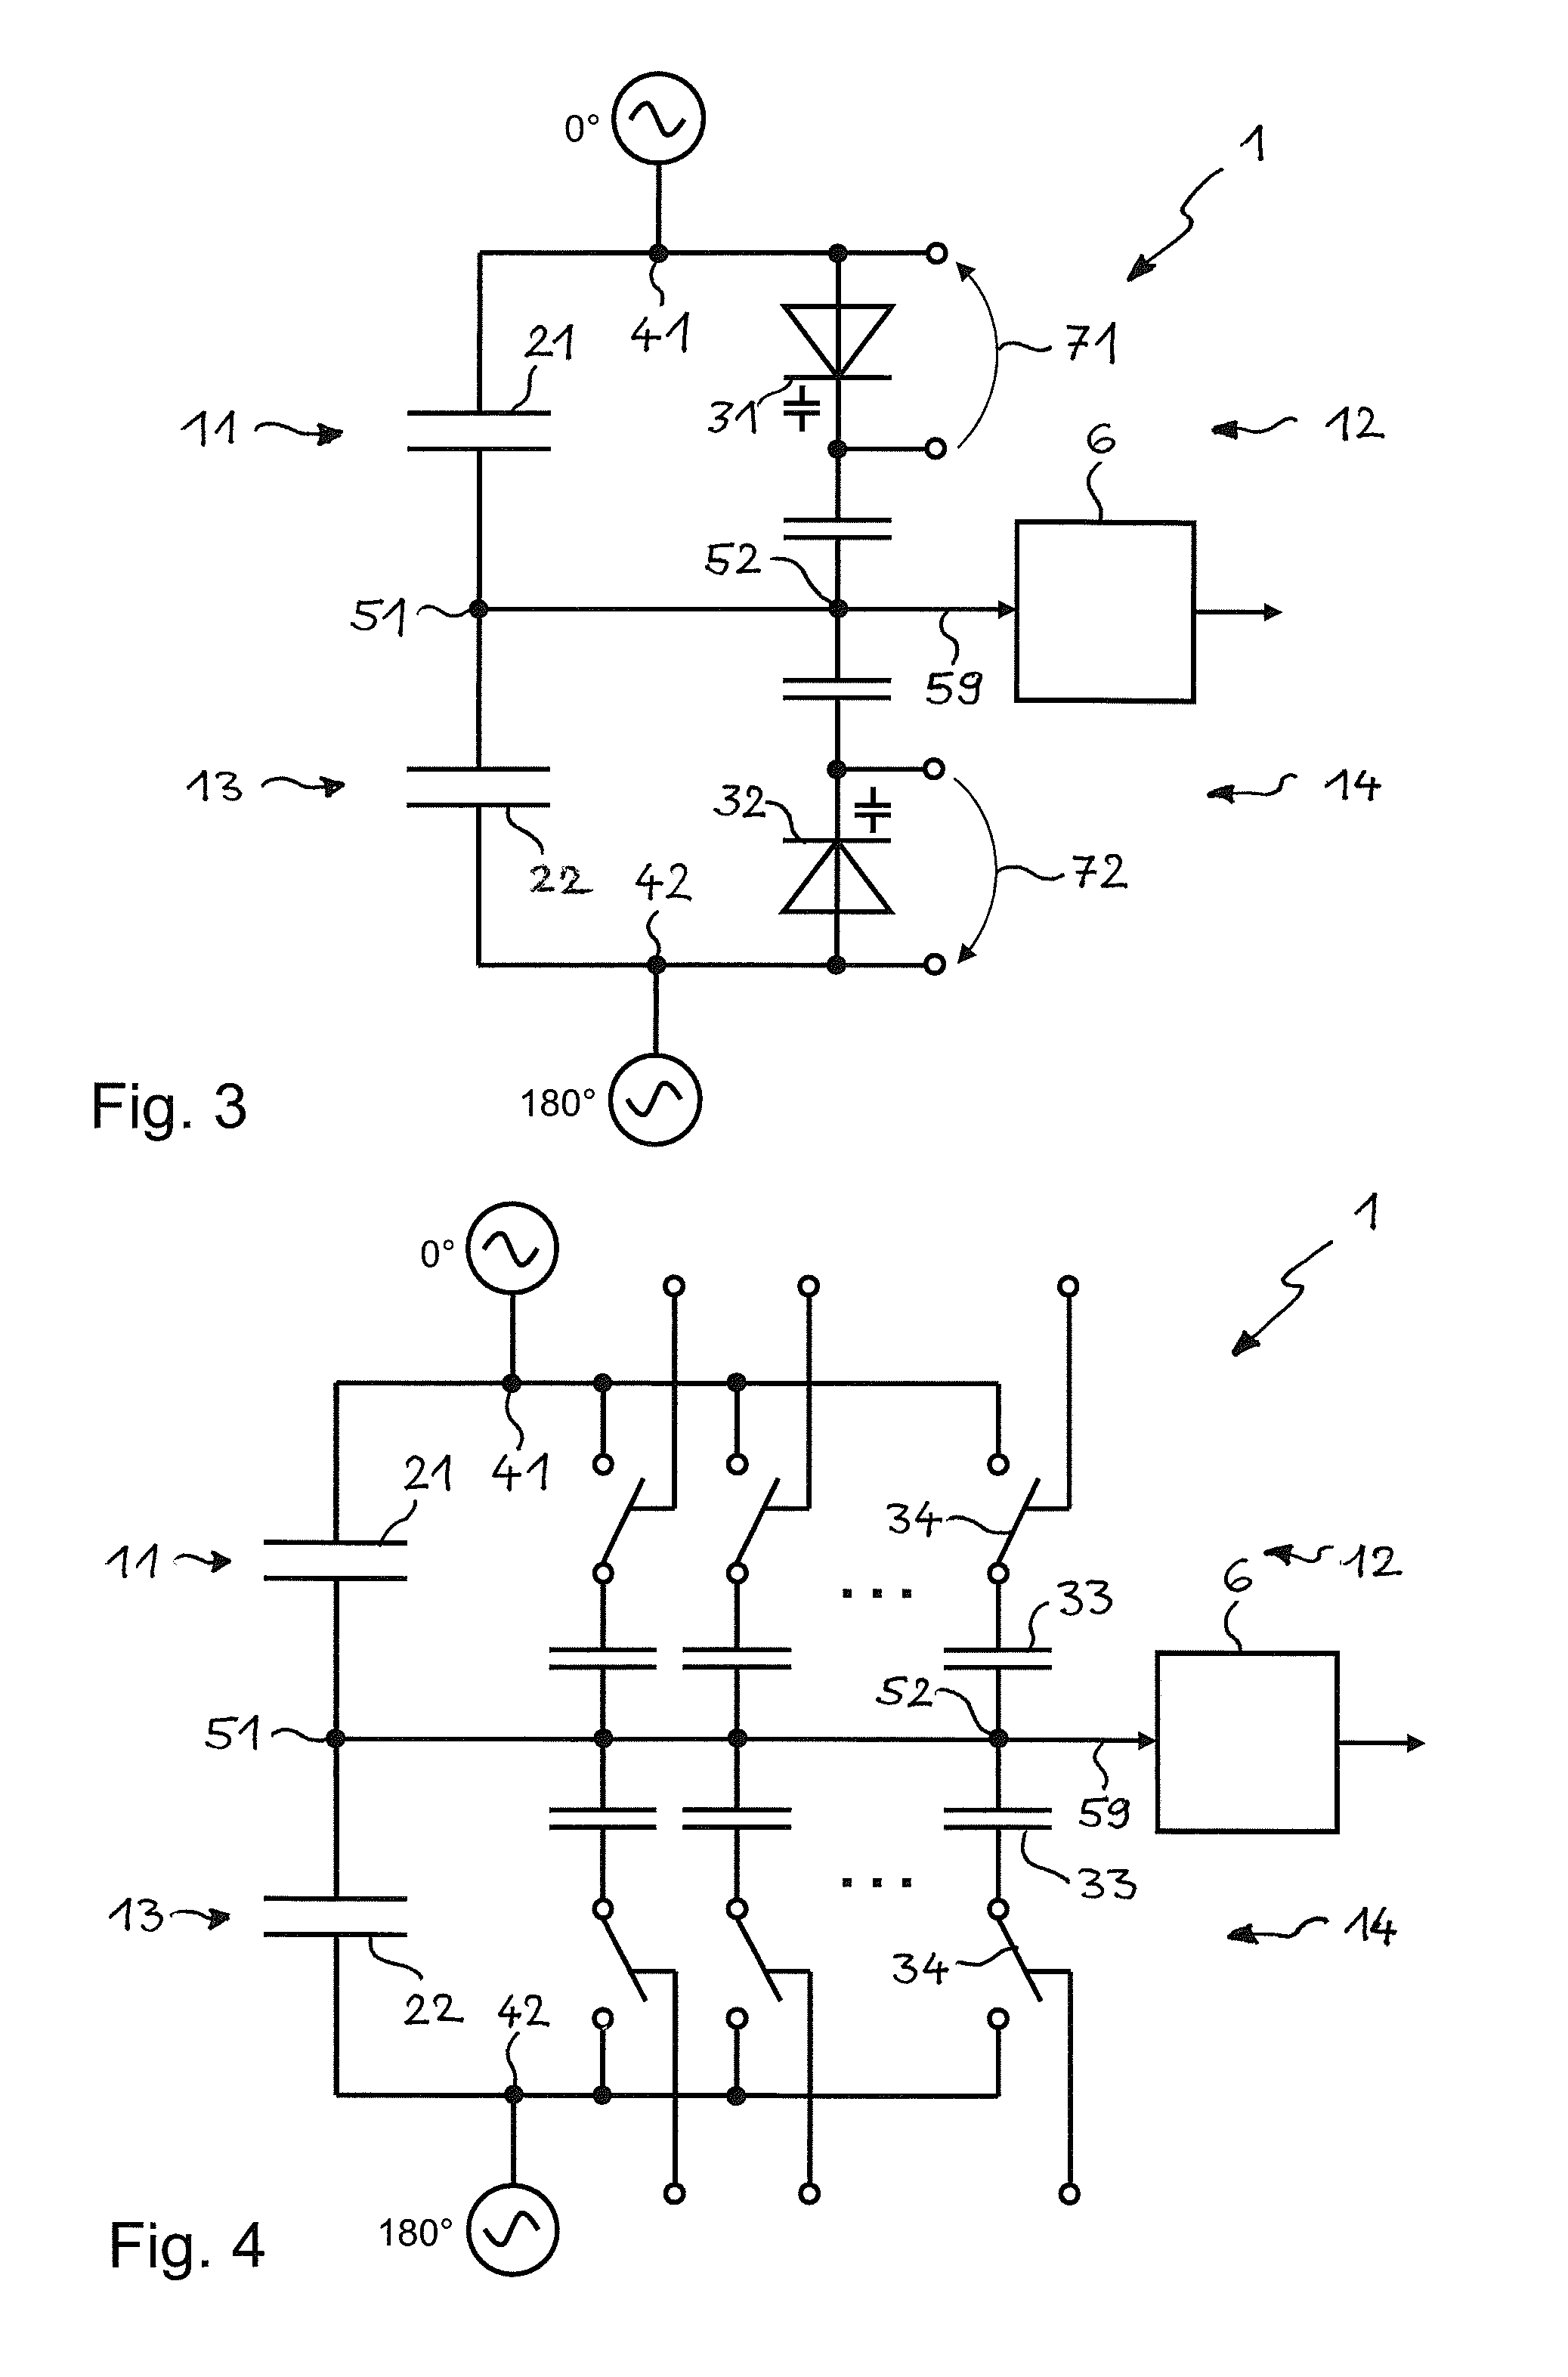 Capacitive Measuring Circuit for Yarn Inspection